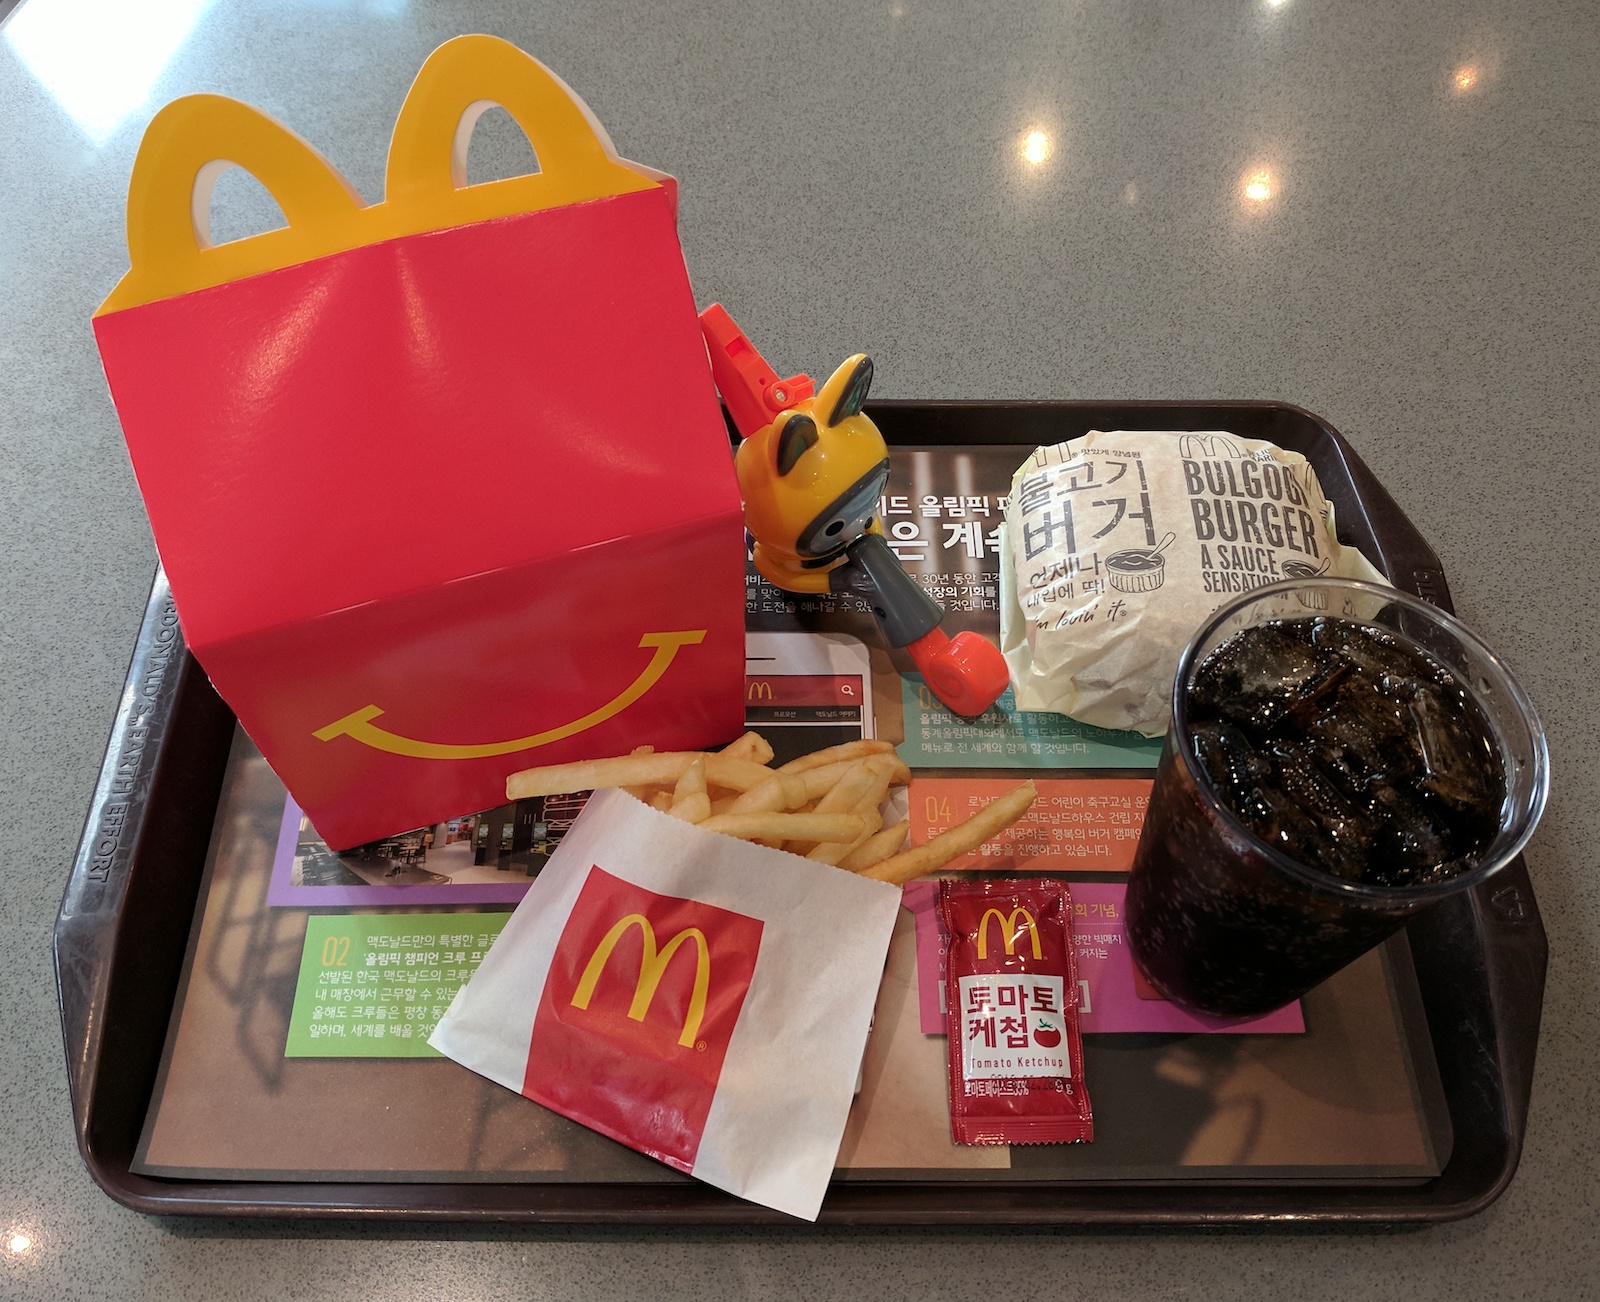 McDonalds Happy Meal from South Korea